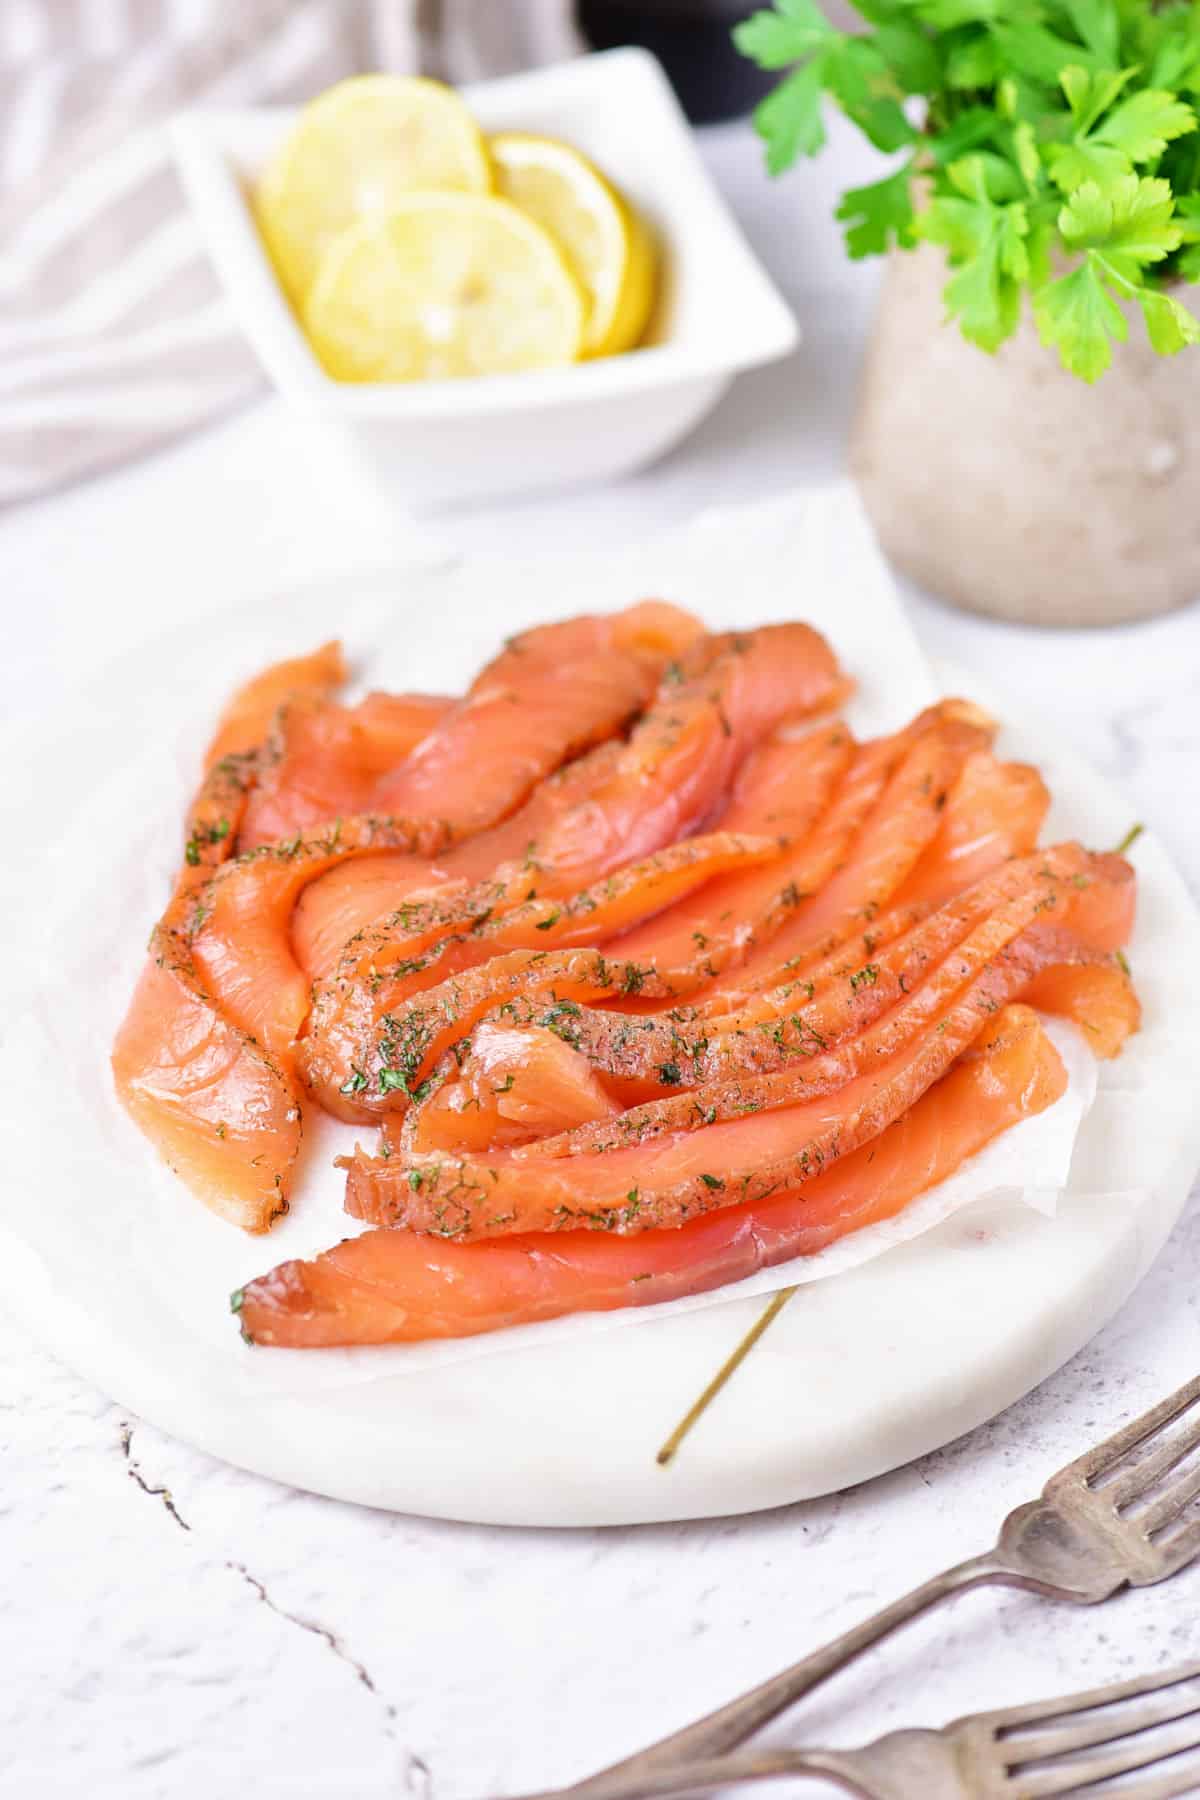 Sliced cured salmon with dill on a white plate. Lemon and herbs on the white background.